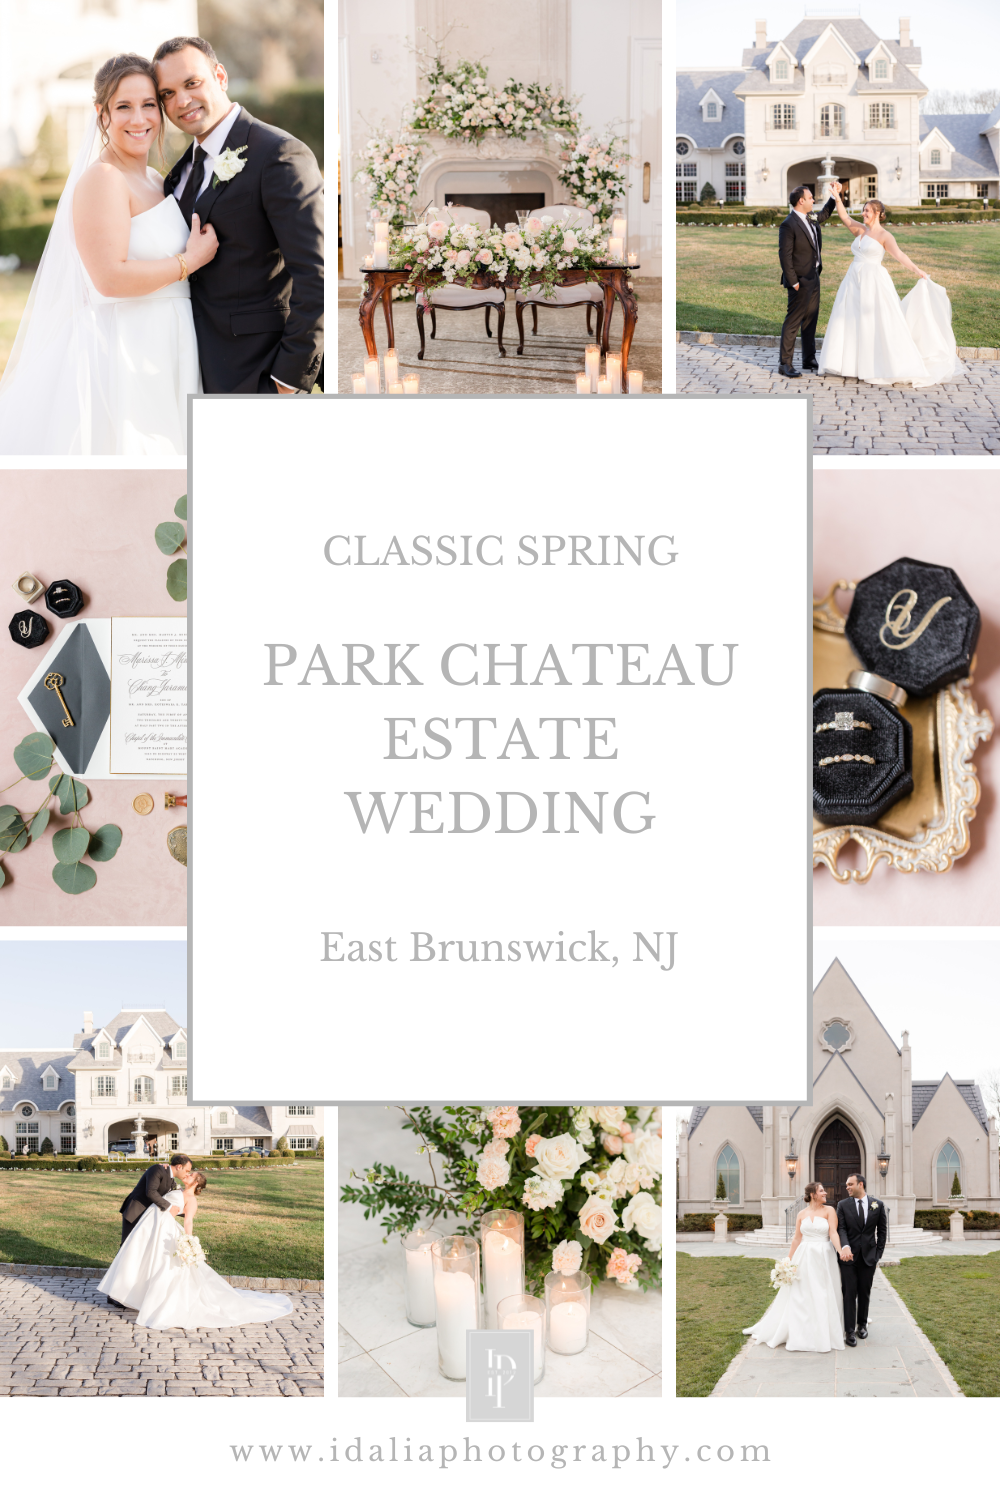 Spring Wedding at Park Chateau Estate with ceremony at Immaculate Conception Chapel with Idalia Photography, NJ wedding photographer